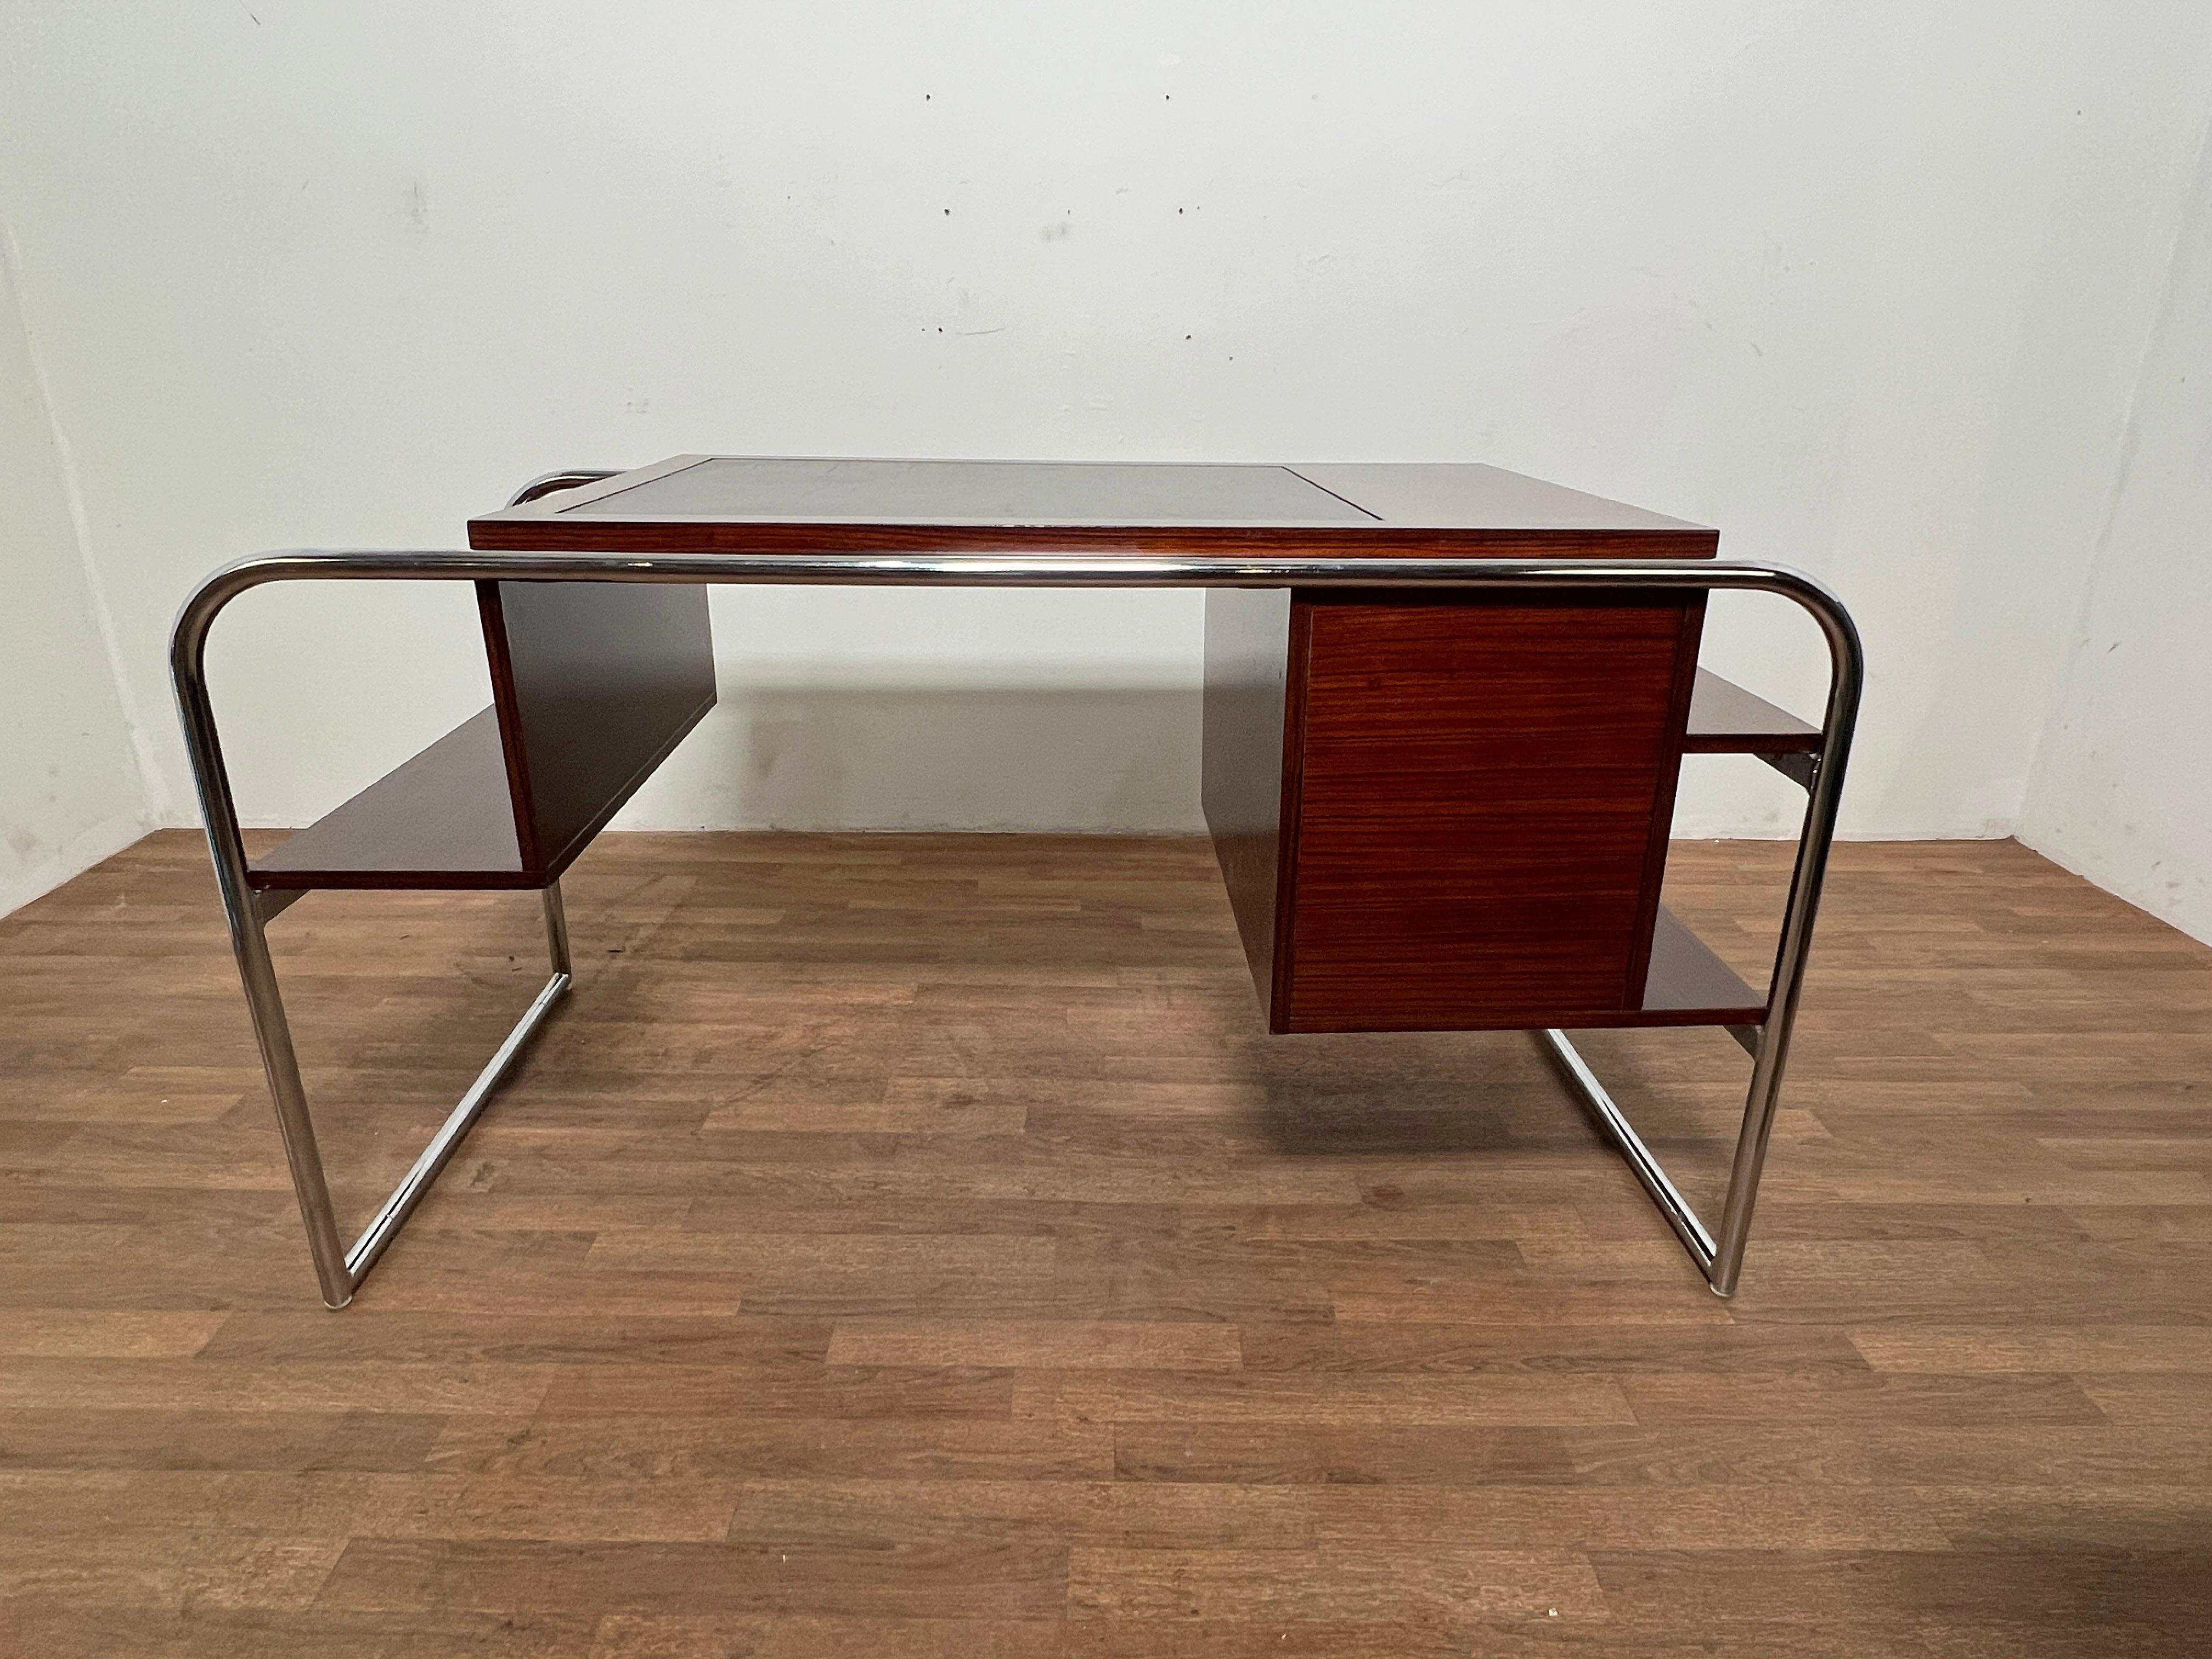 Ralph Lauren Bauhaus Inspired Desk in Rosewood, Chrome and Leather For Sale 6